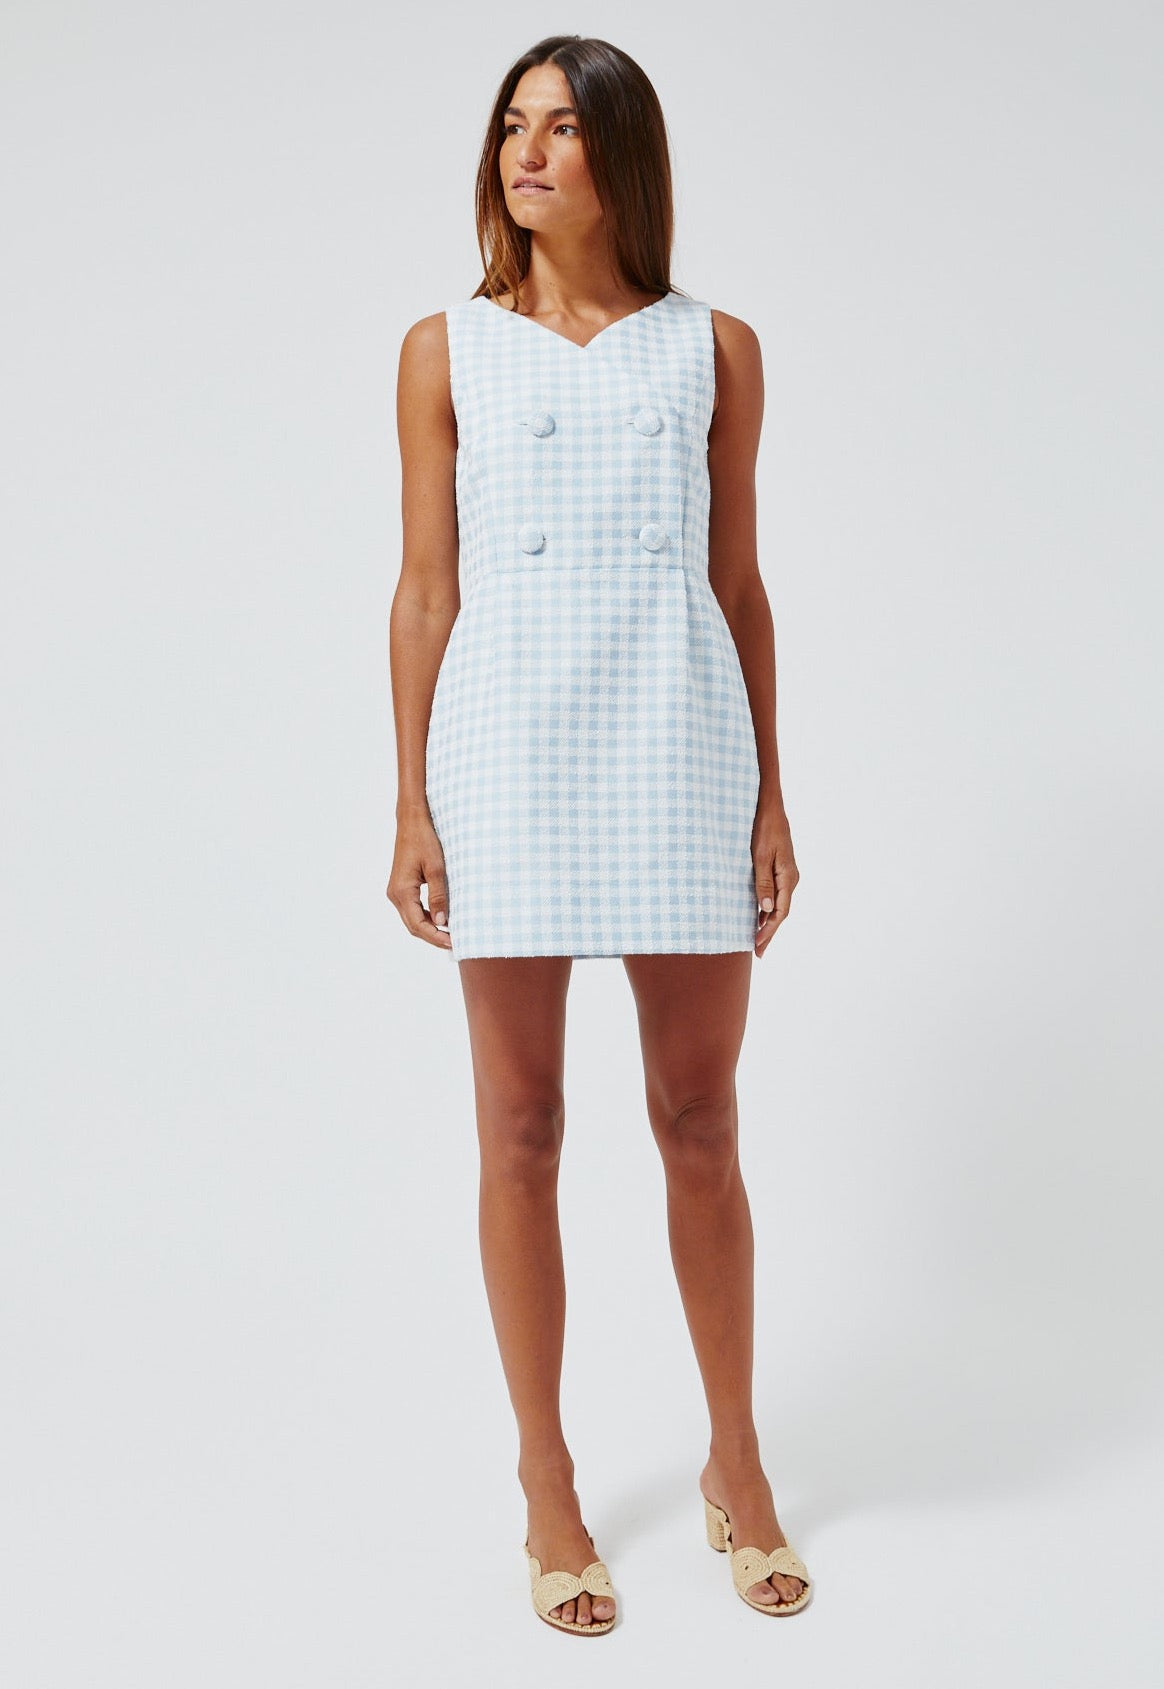 THE JACKIE MINI DRESS in VINTAGE BLUE GINGHAM BOUCLE